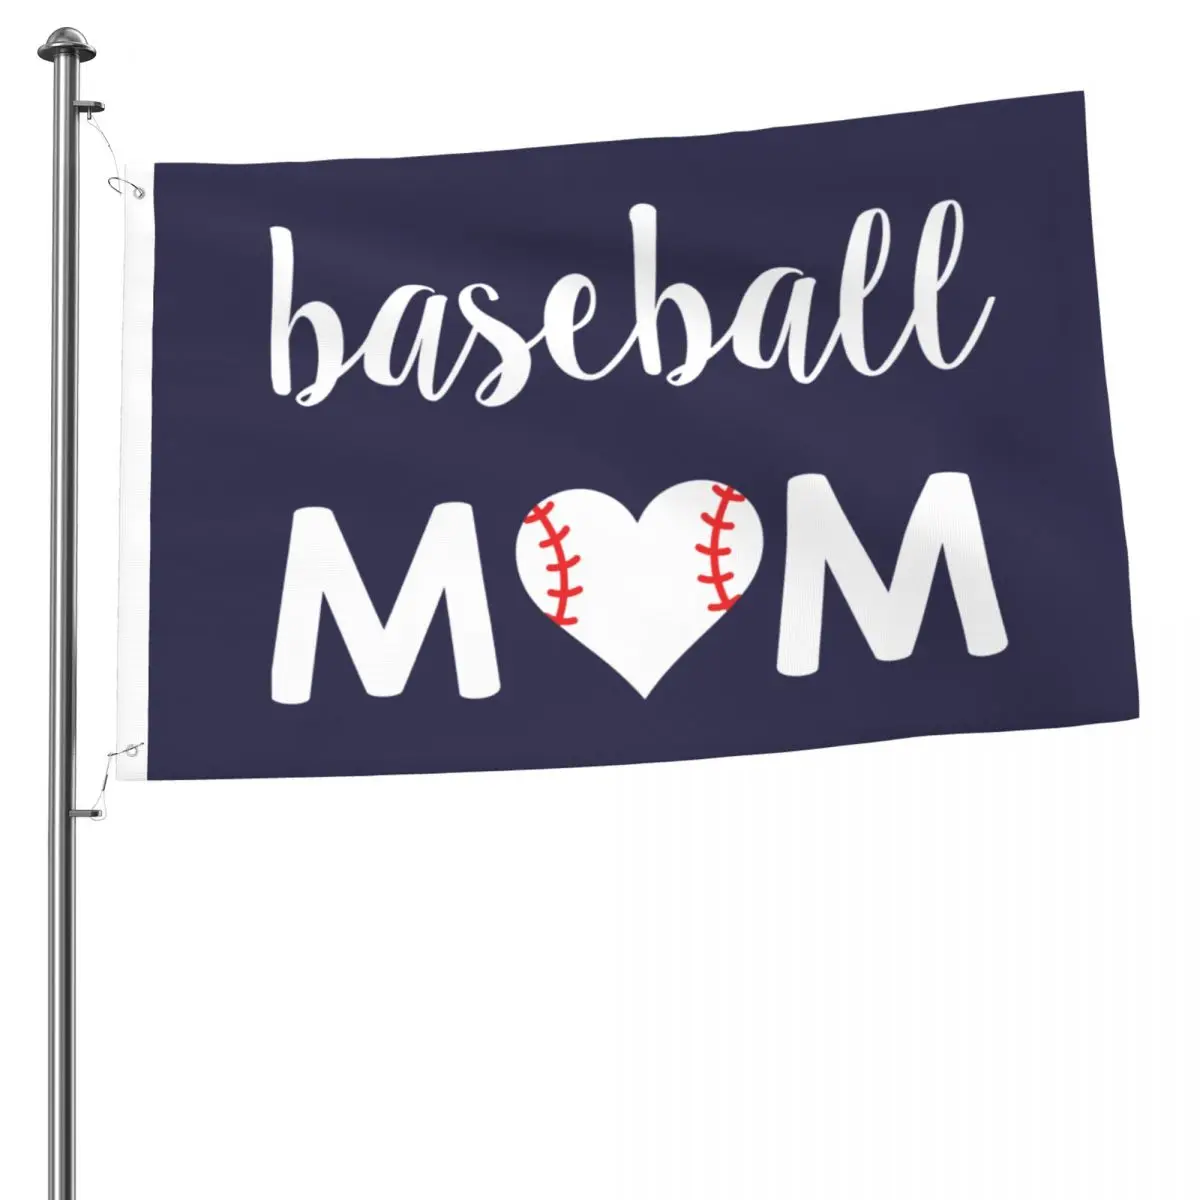 

Baseball Mom Outdoor Flag Decorative Banners For Home Decor House Yard Outdoor Party Supplies 2x3ft